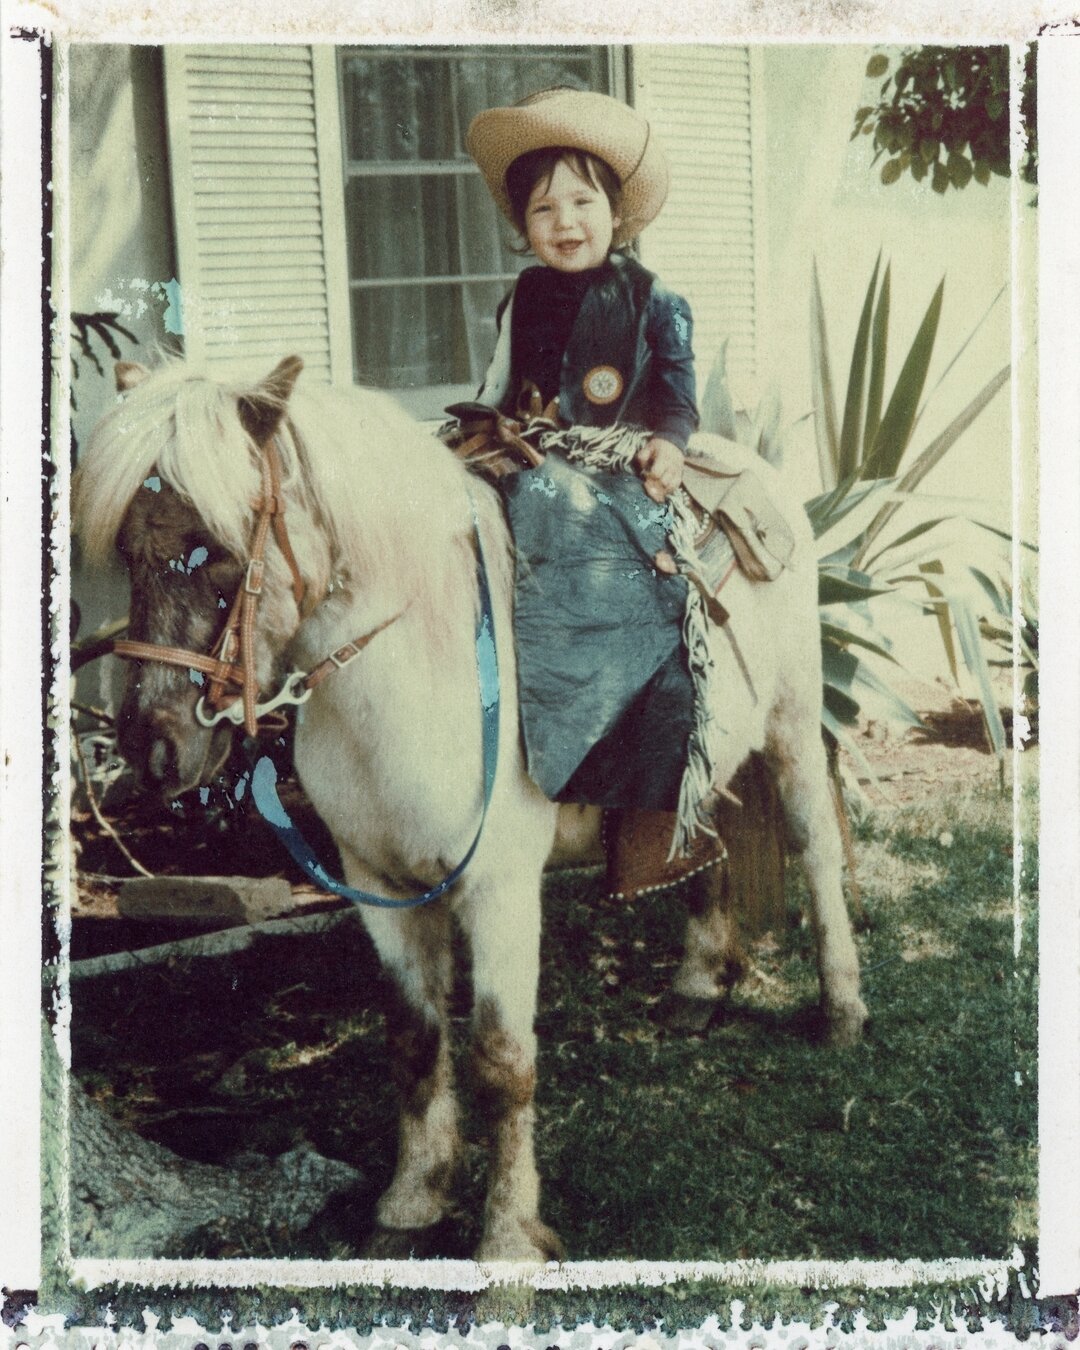 Cowboy phase. I guess photographers used to come around neighborhoods with large animals and ask if you wanted your kid to get dressed up and get a photo. Pretty awesome. 
Polaroid 669 Transfer on Watercolor paper

#polaroid #polaroidi2 #instantphoto